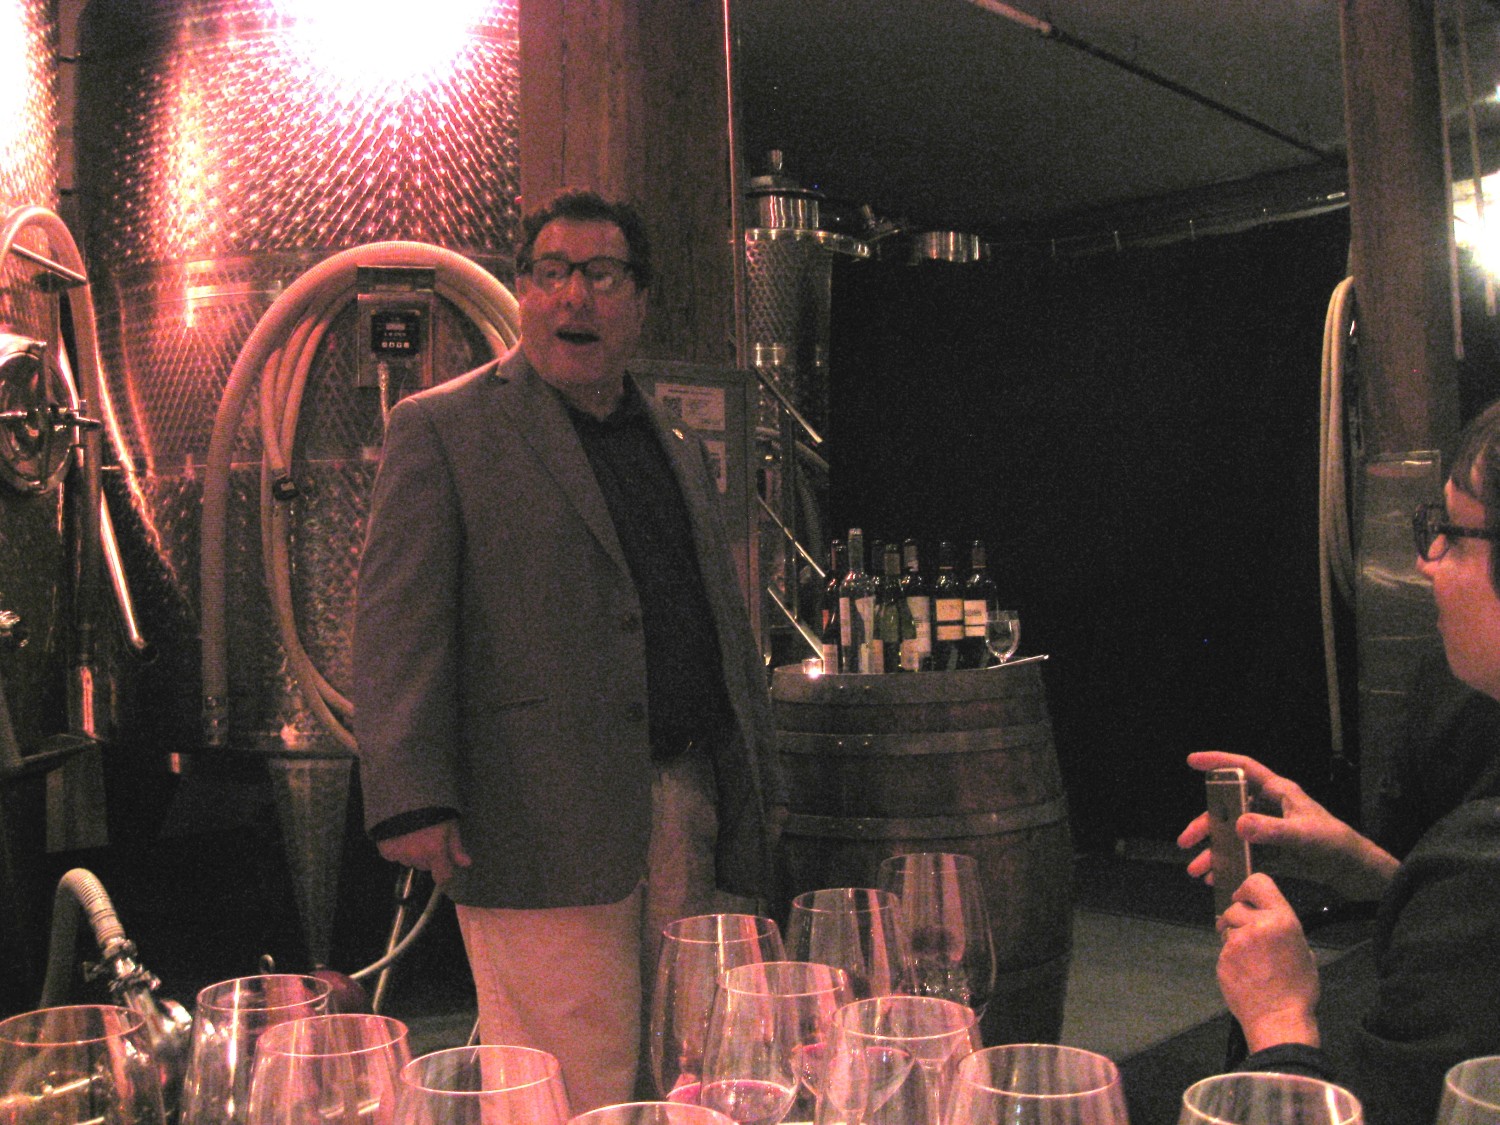 ABCs of Wine Dinner with Evan Goldstein Dinner at City Winery, Wine Casual